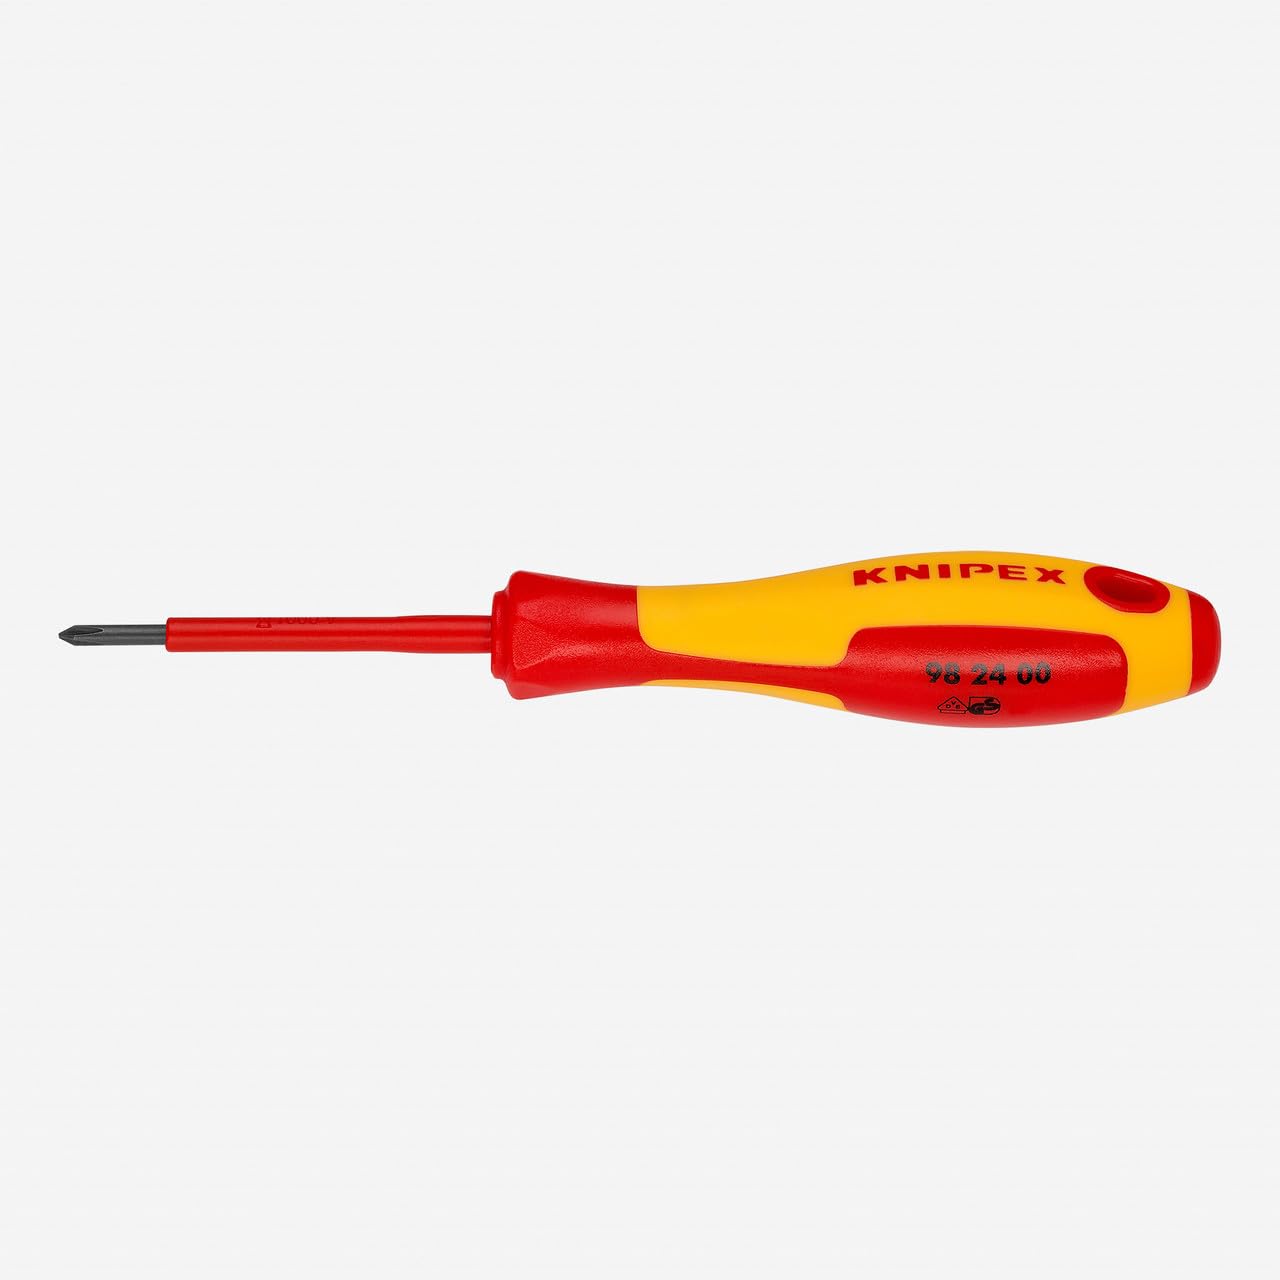 Knipex - Phillips Screwdriver, 2 1/2"-1000V Insulated, PH 0 (982400) $4.84